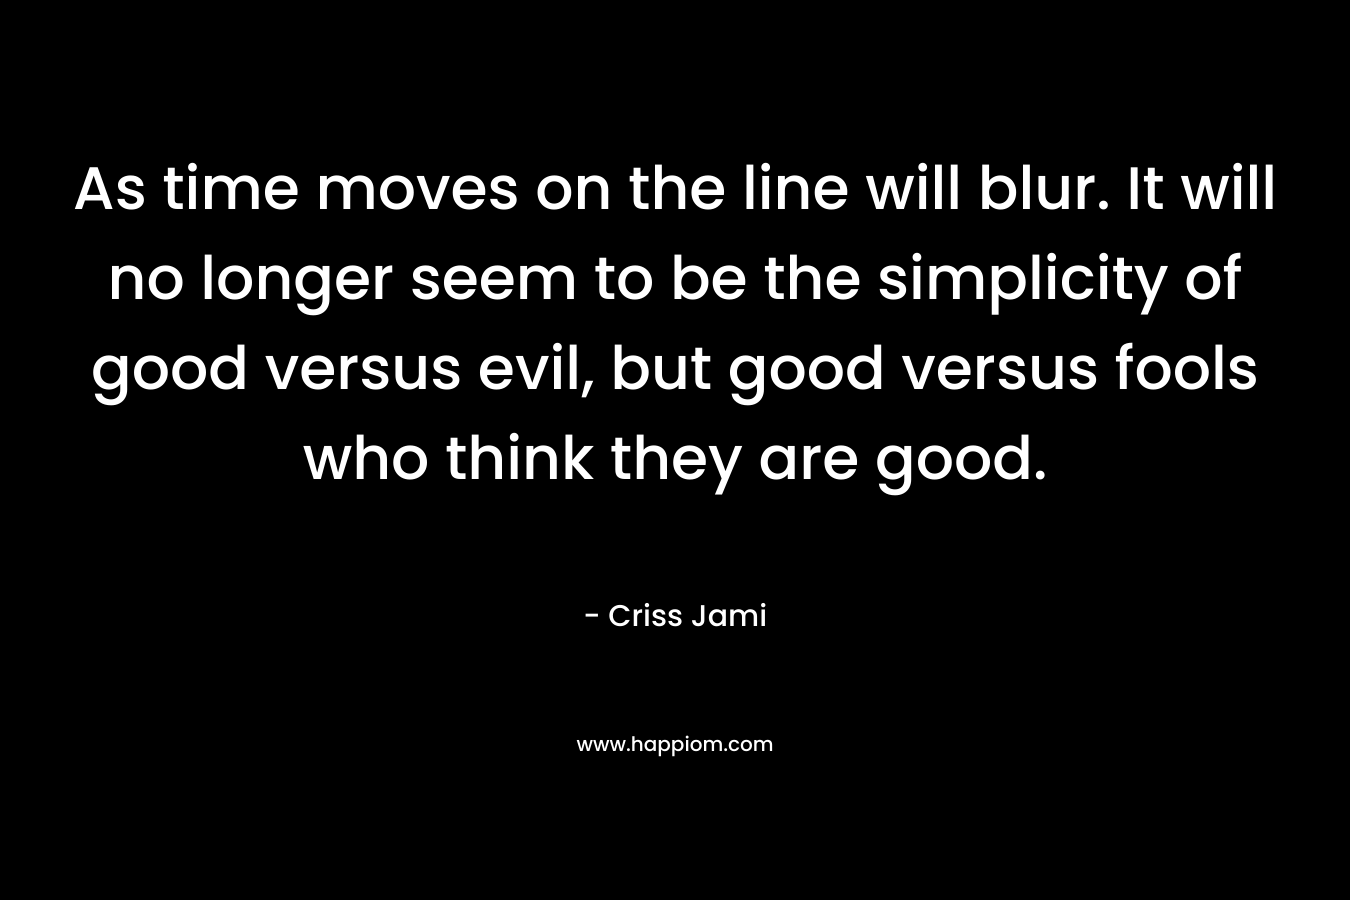 As time moves on the line will blur. It will no longer seem to be the simplicity of good versus evil, but good versus fools who think they are good. – Criss Jami